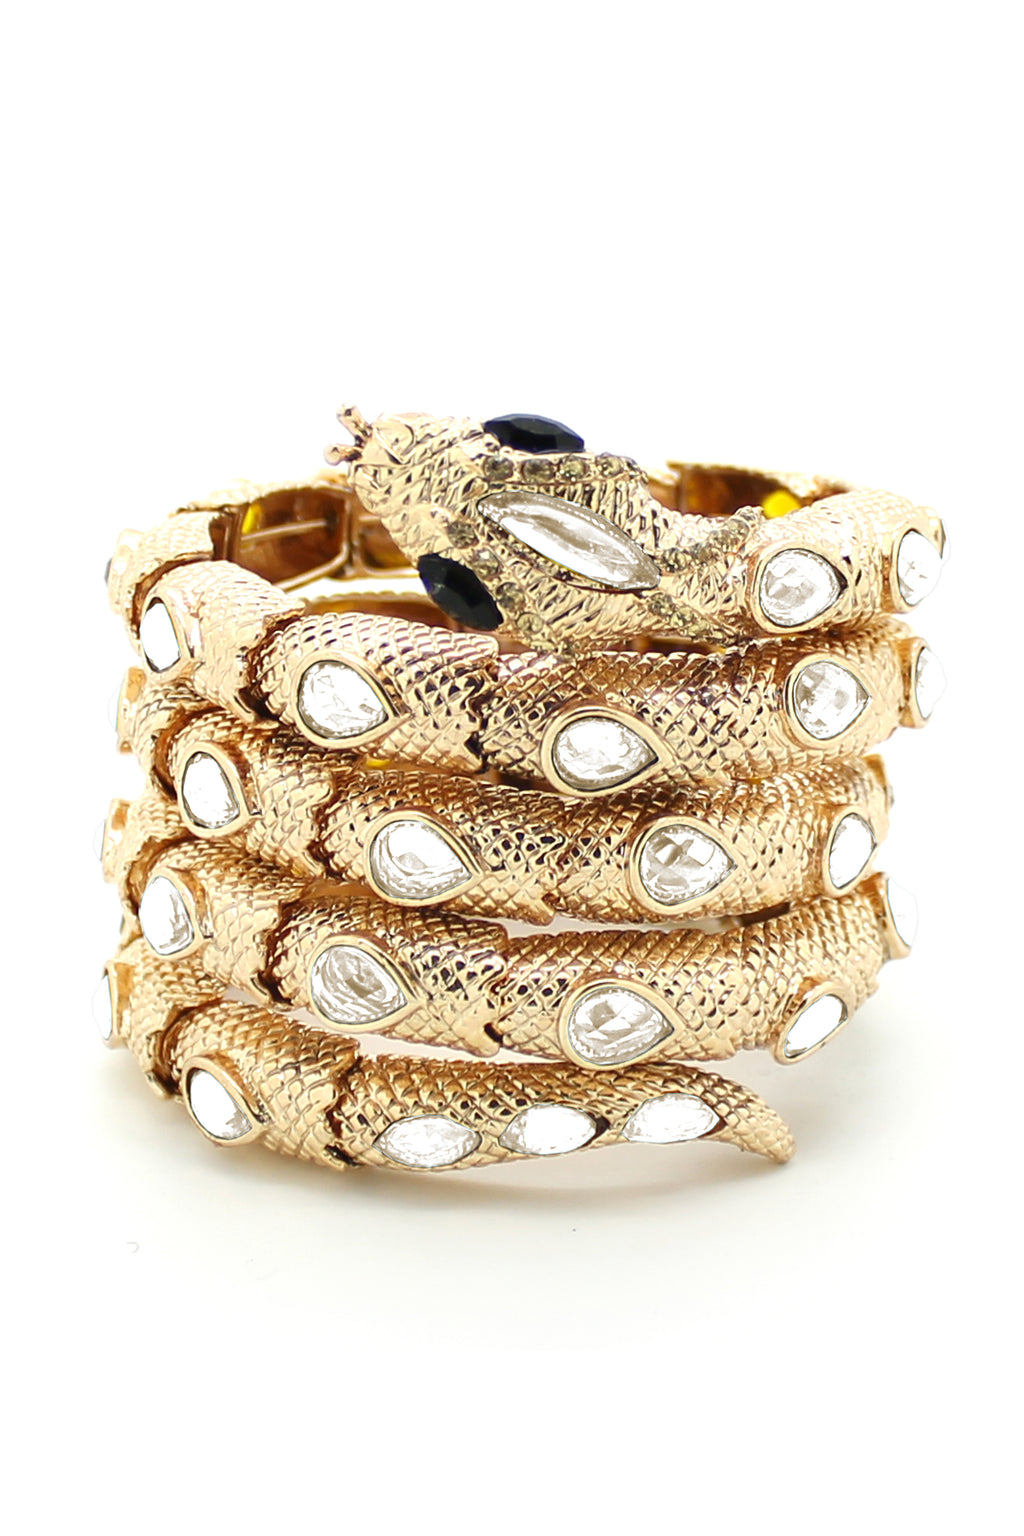 Gold alloy snake cuff bracelet with clear glass crystals.